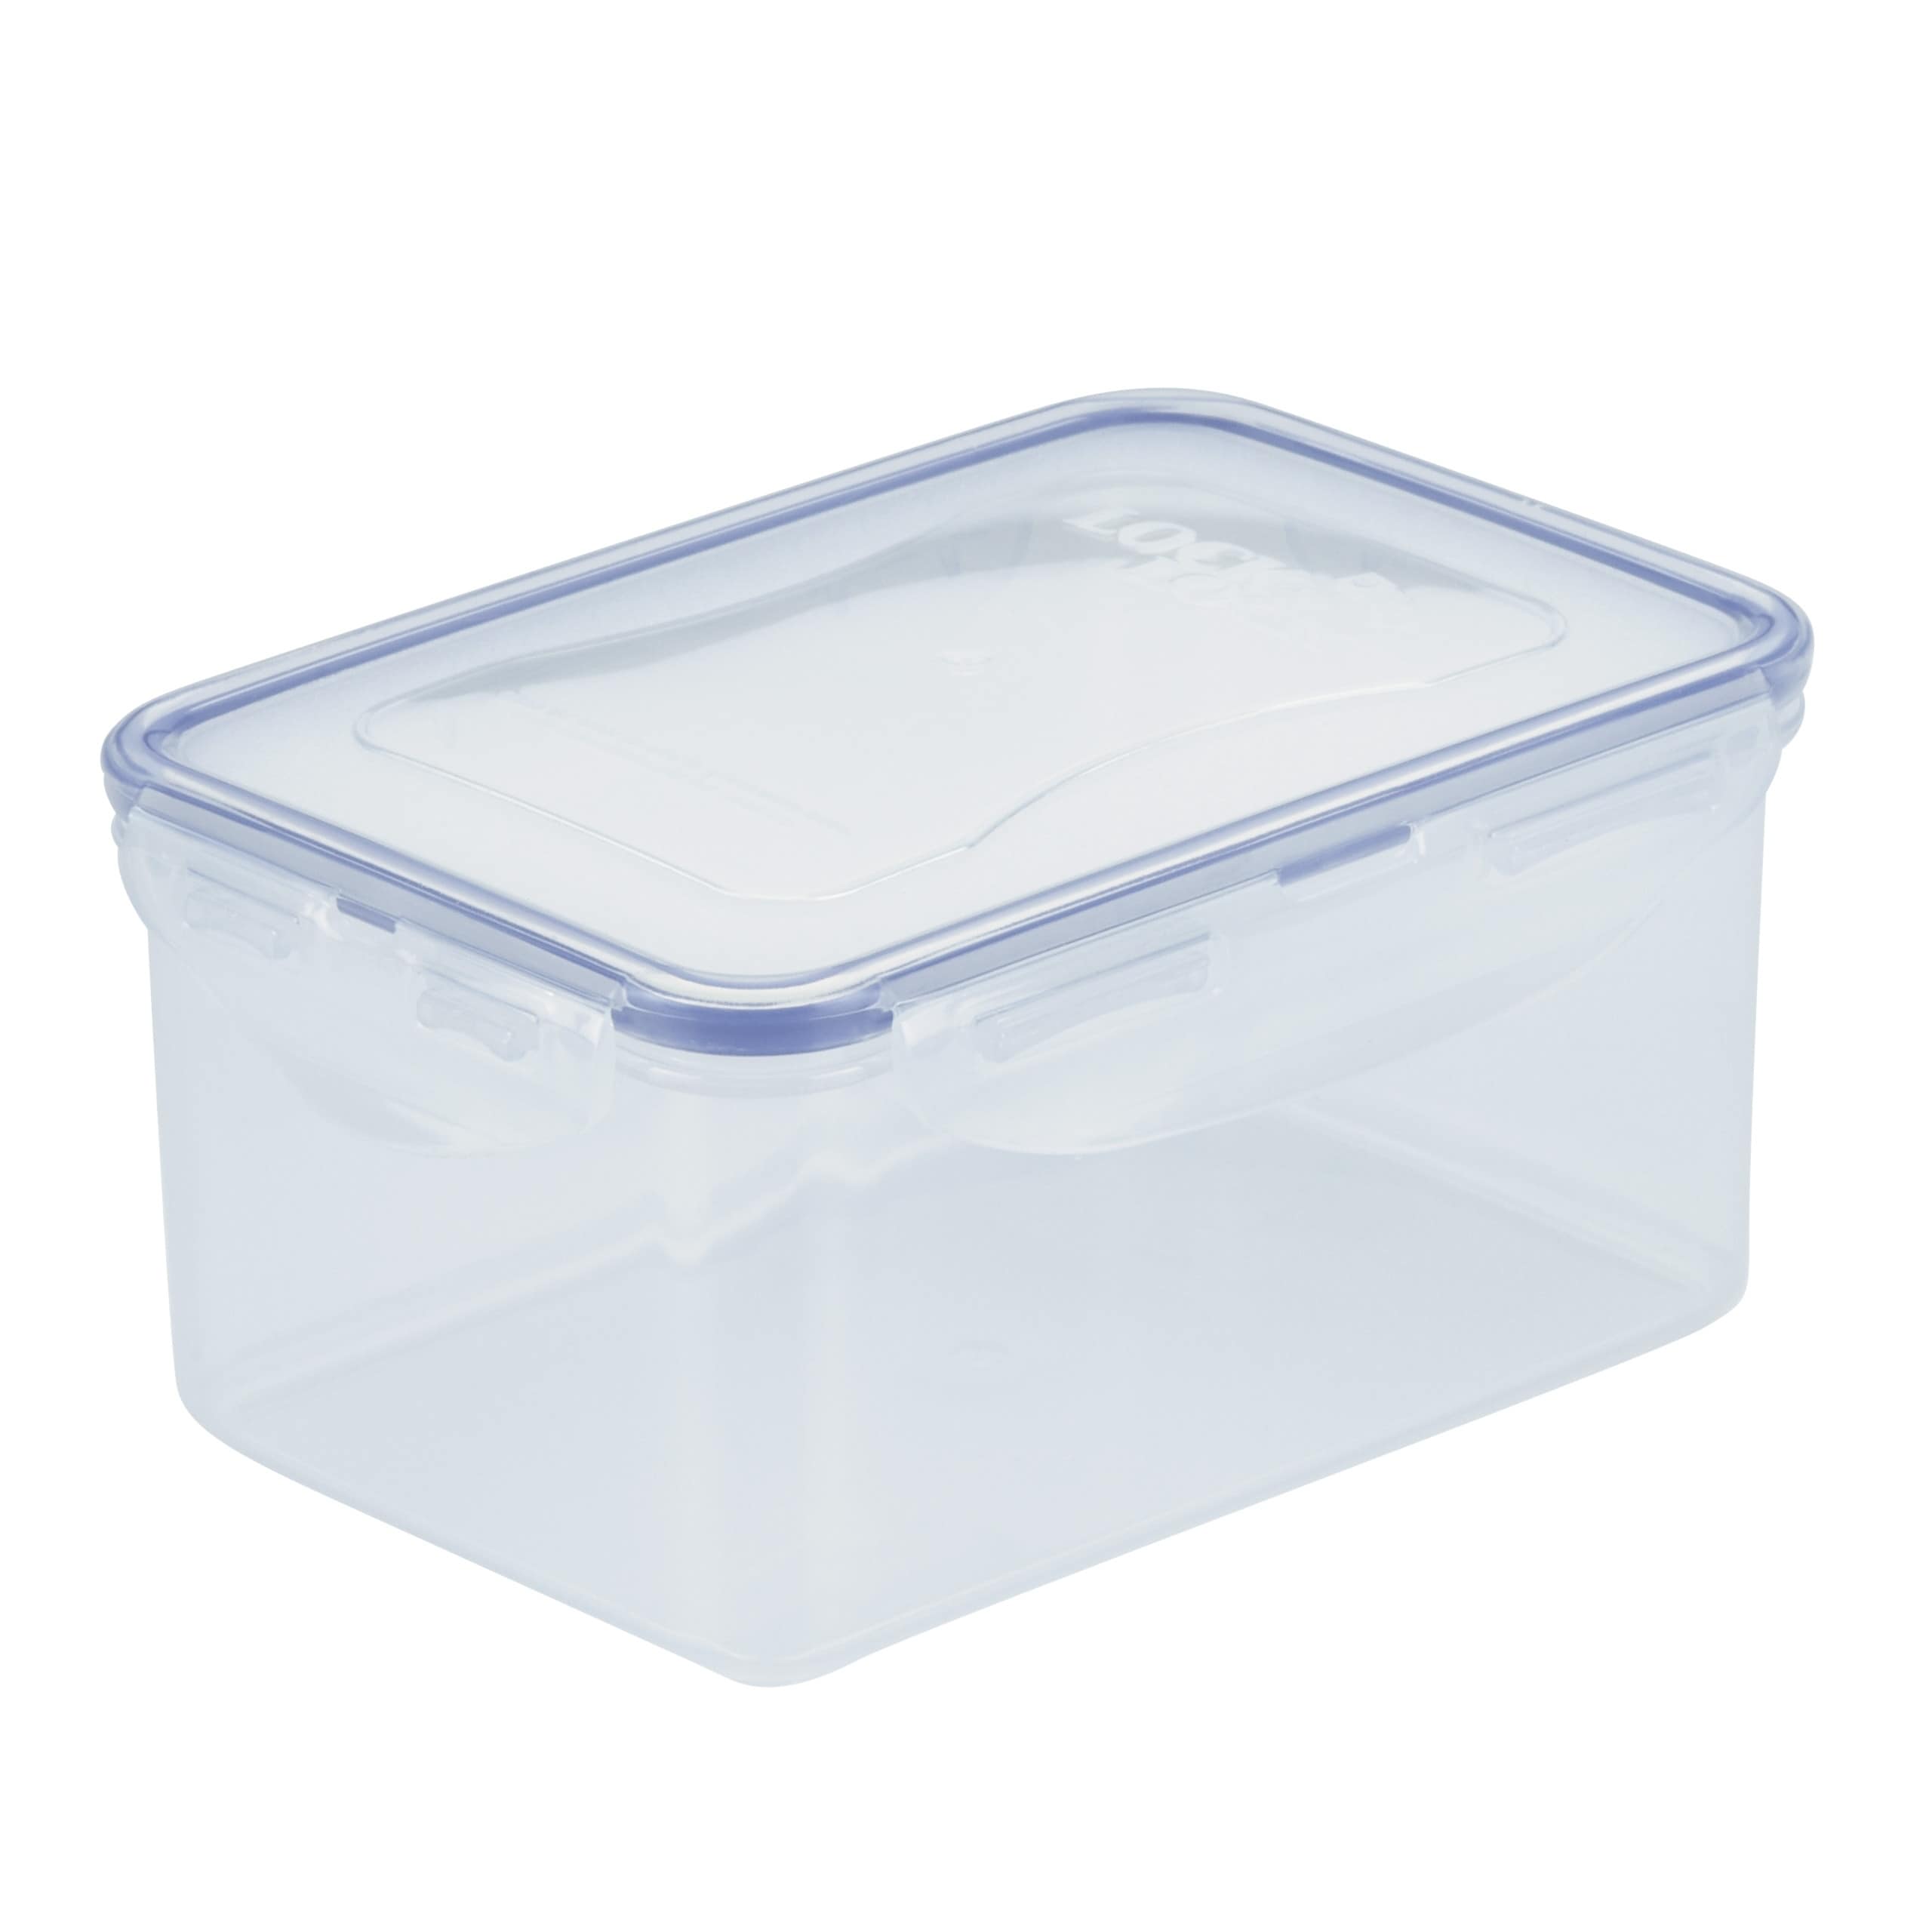 Sorbus Clear Plastic Organizer Storage Bin Containers with Handles for Pantry Food & Kitchen Fridge (8-Pack)